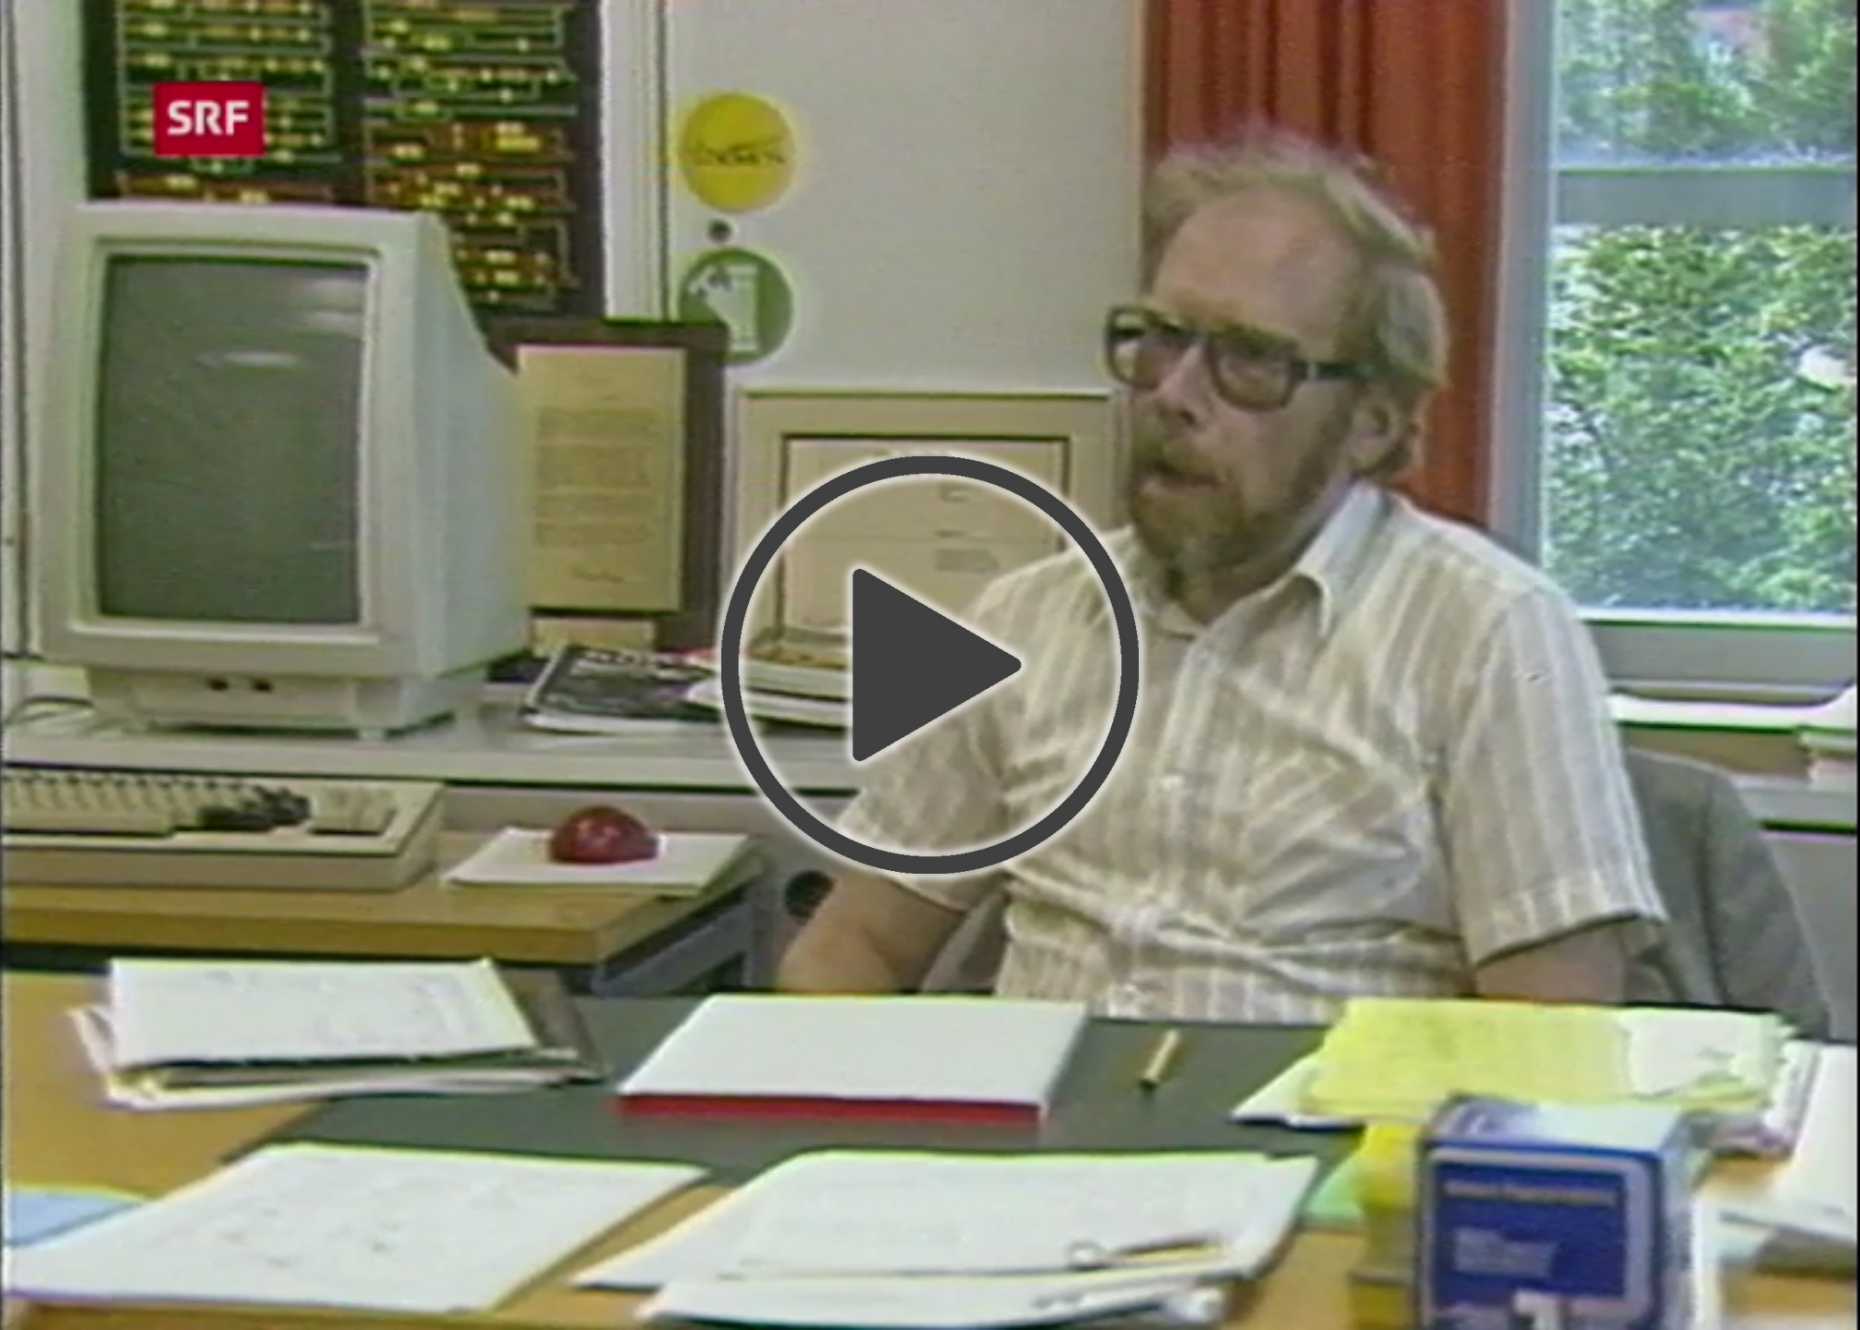 Niklaus Wirth speaks in the SRF programme Karussell